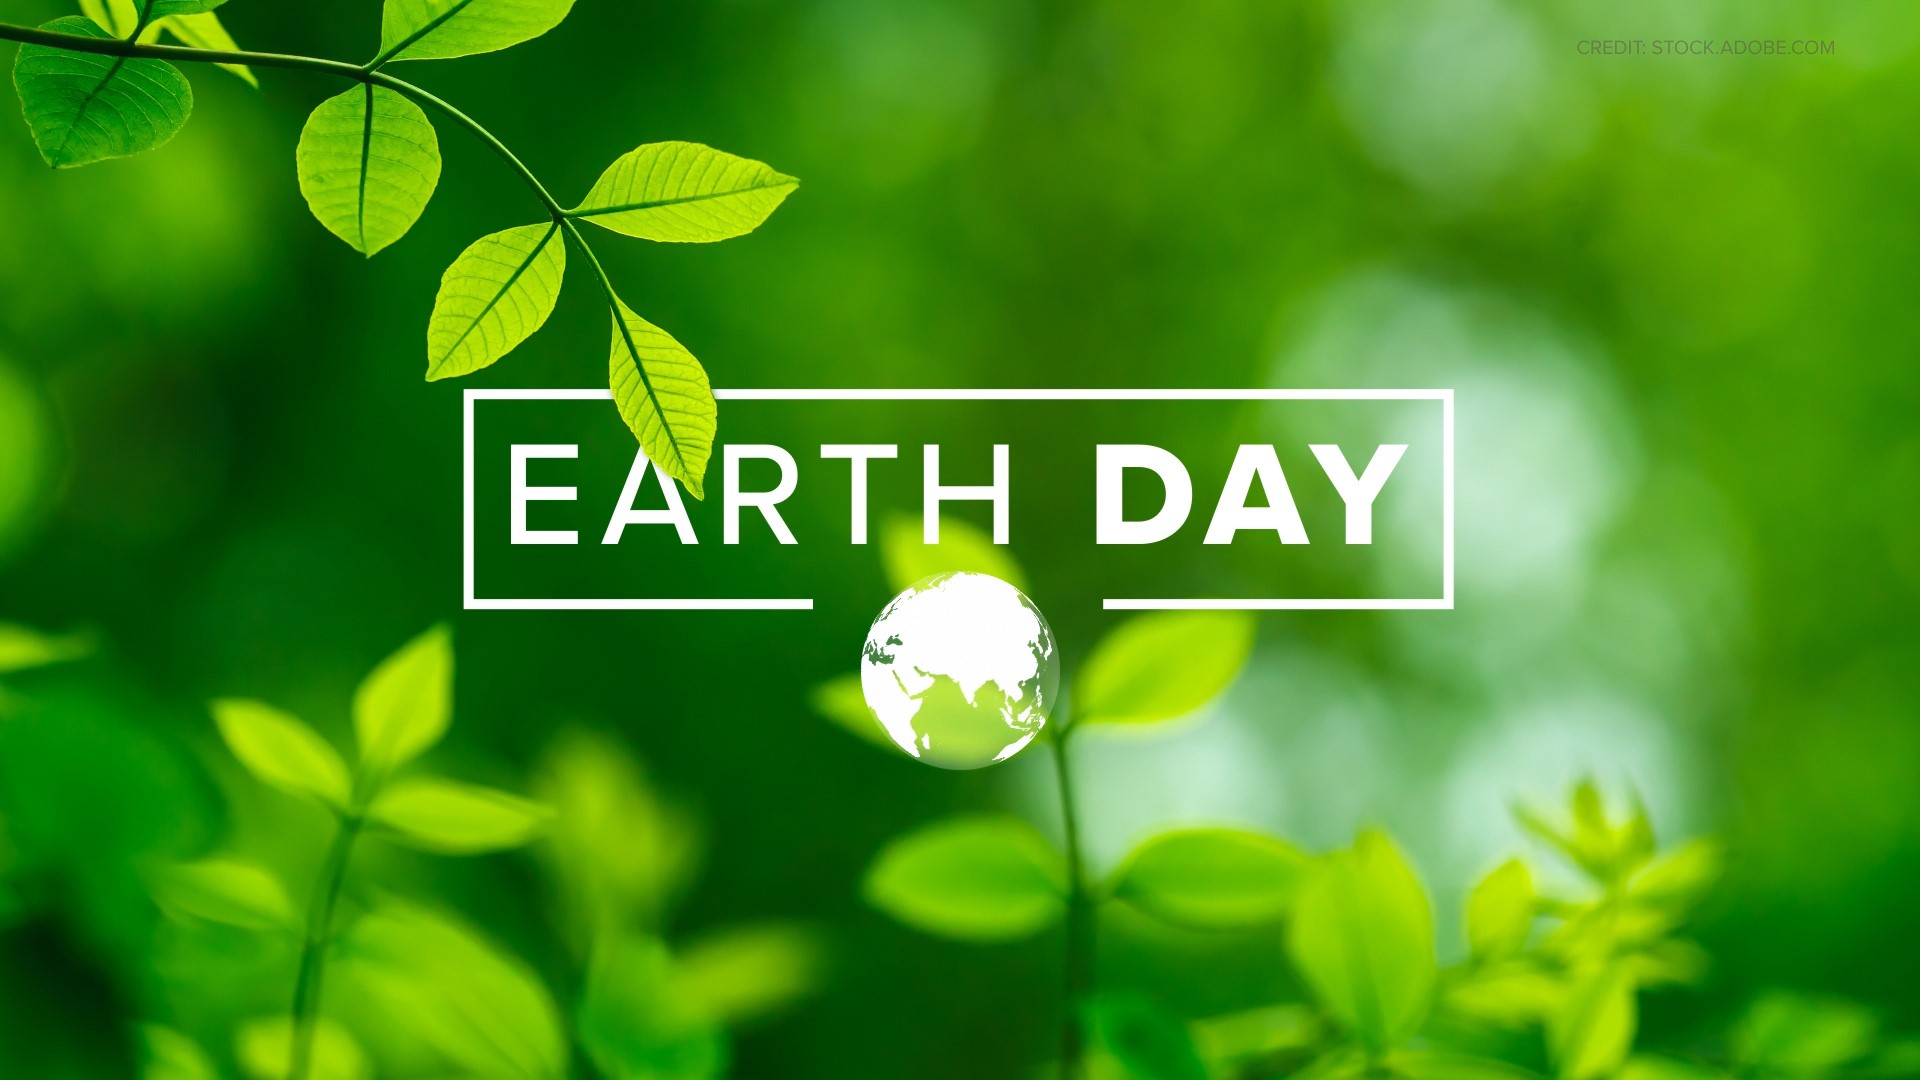 What are your plans for Earth Day? Text them to 515-457-1026!